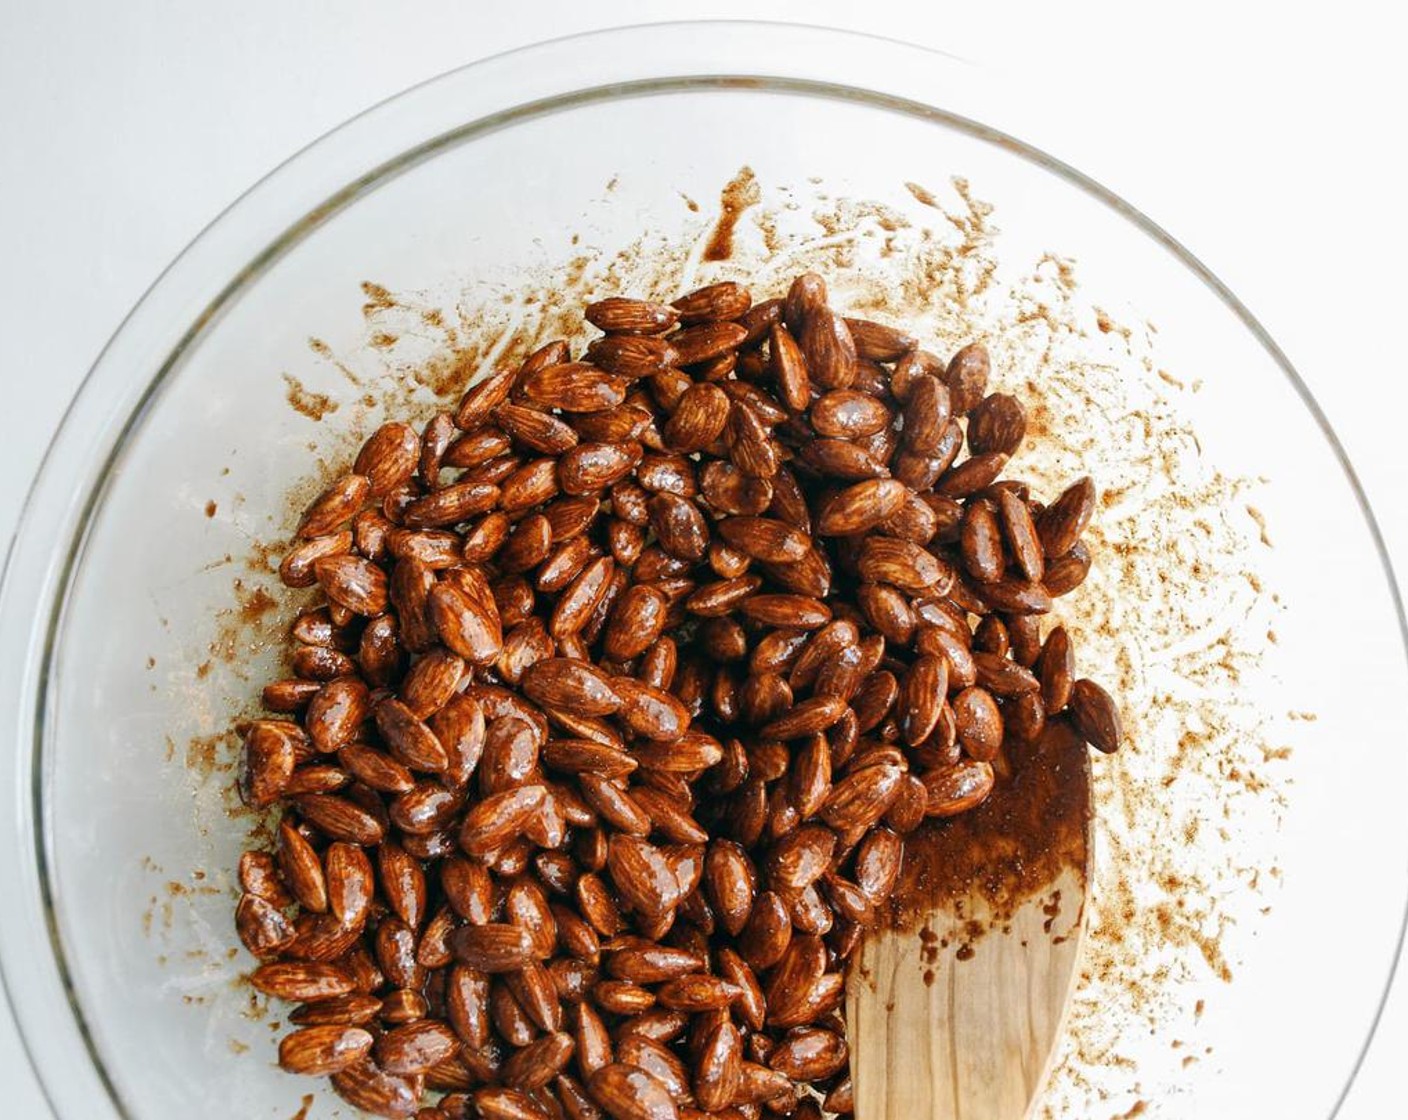 step 2 In a large mixing bowl, add Raw Almonds (3 cups), Pure Maple Syrup (1/4 cup), Vanilla Extract (1/2 Tbsp), Unsweetened Cocoa Powder (1 tsp), Ground Cinnamon (1 tsp), Ground Cardamom (1 tsp), Ground Ginger (1 tsp), Ground Cloves (1/2 tsp), and Ground Black Pepper (1/4 tsp). Mix to coat well.